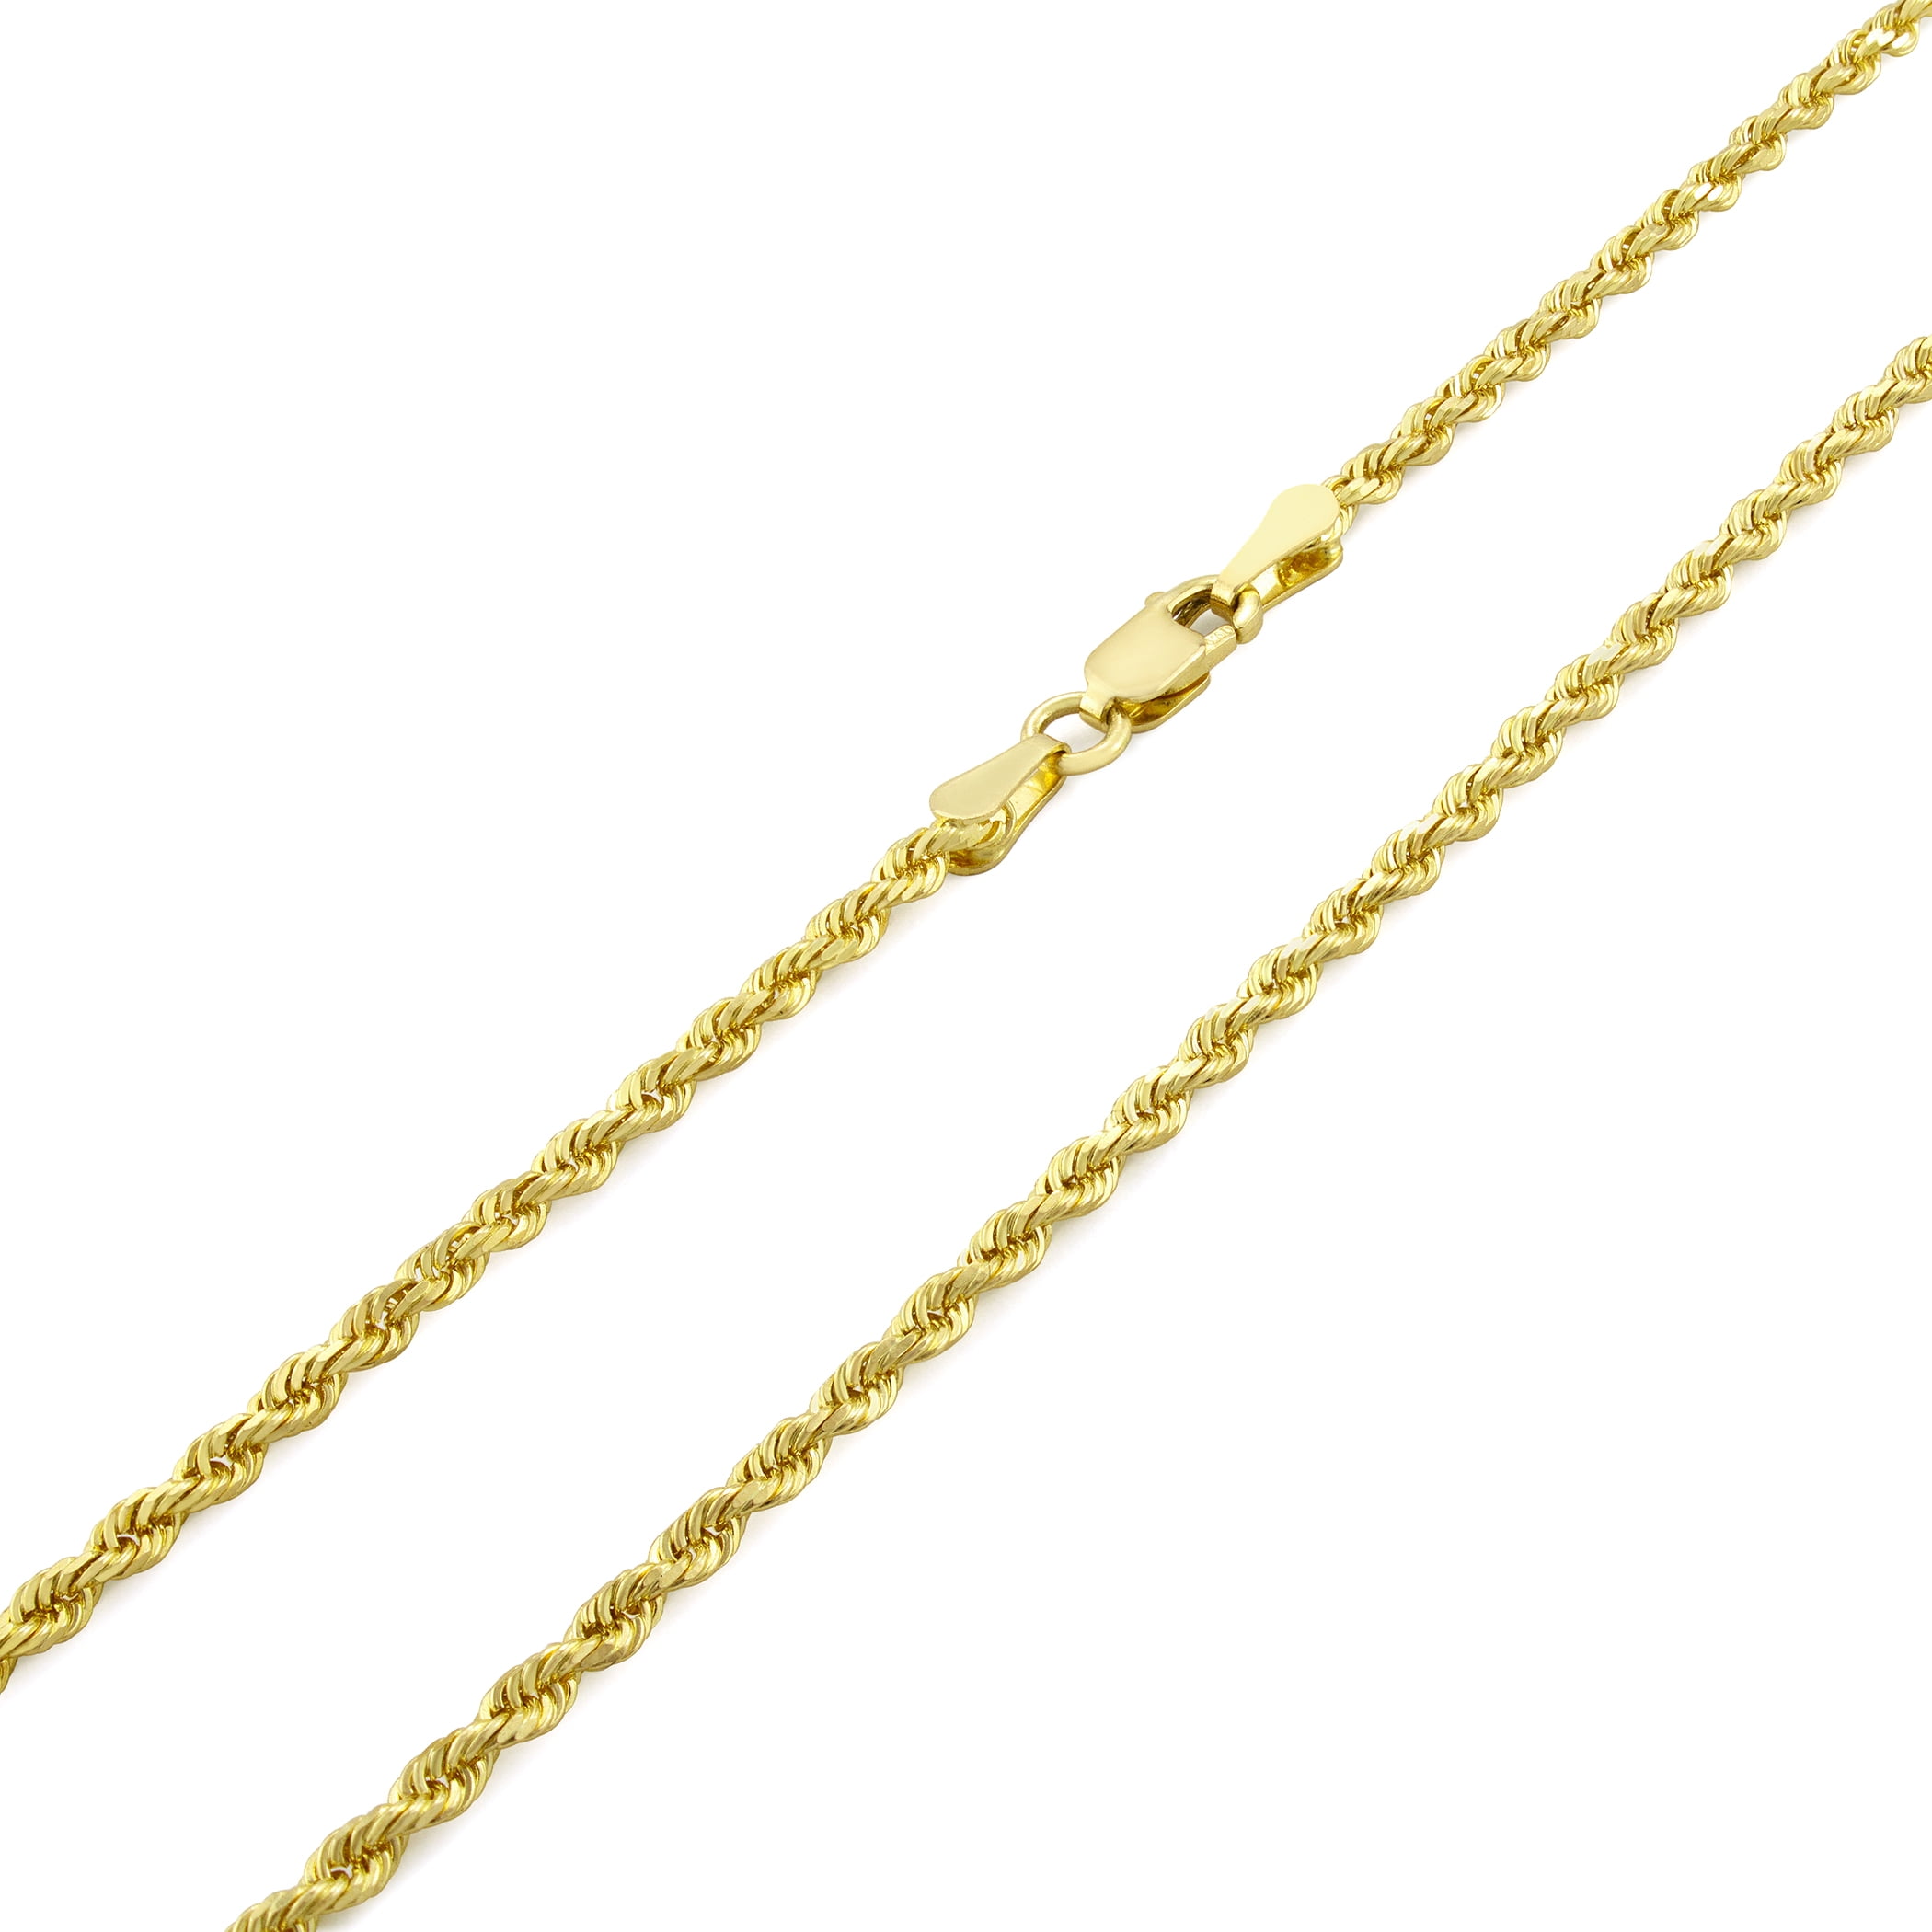 Authentic 10k Yellow Solid Gold D/C Rope Chain 1.5mm~4mm/16"~30" for Men Women 